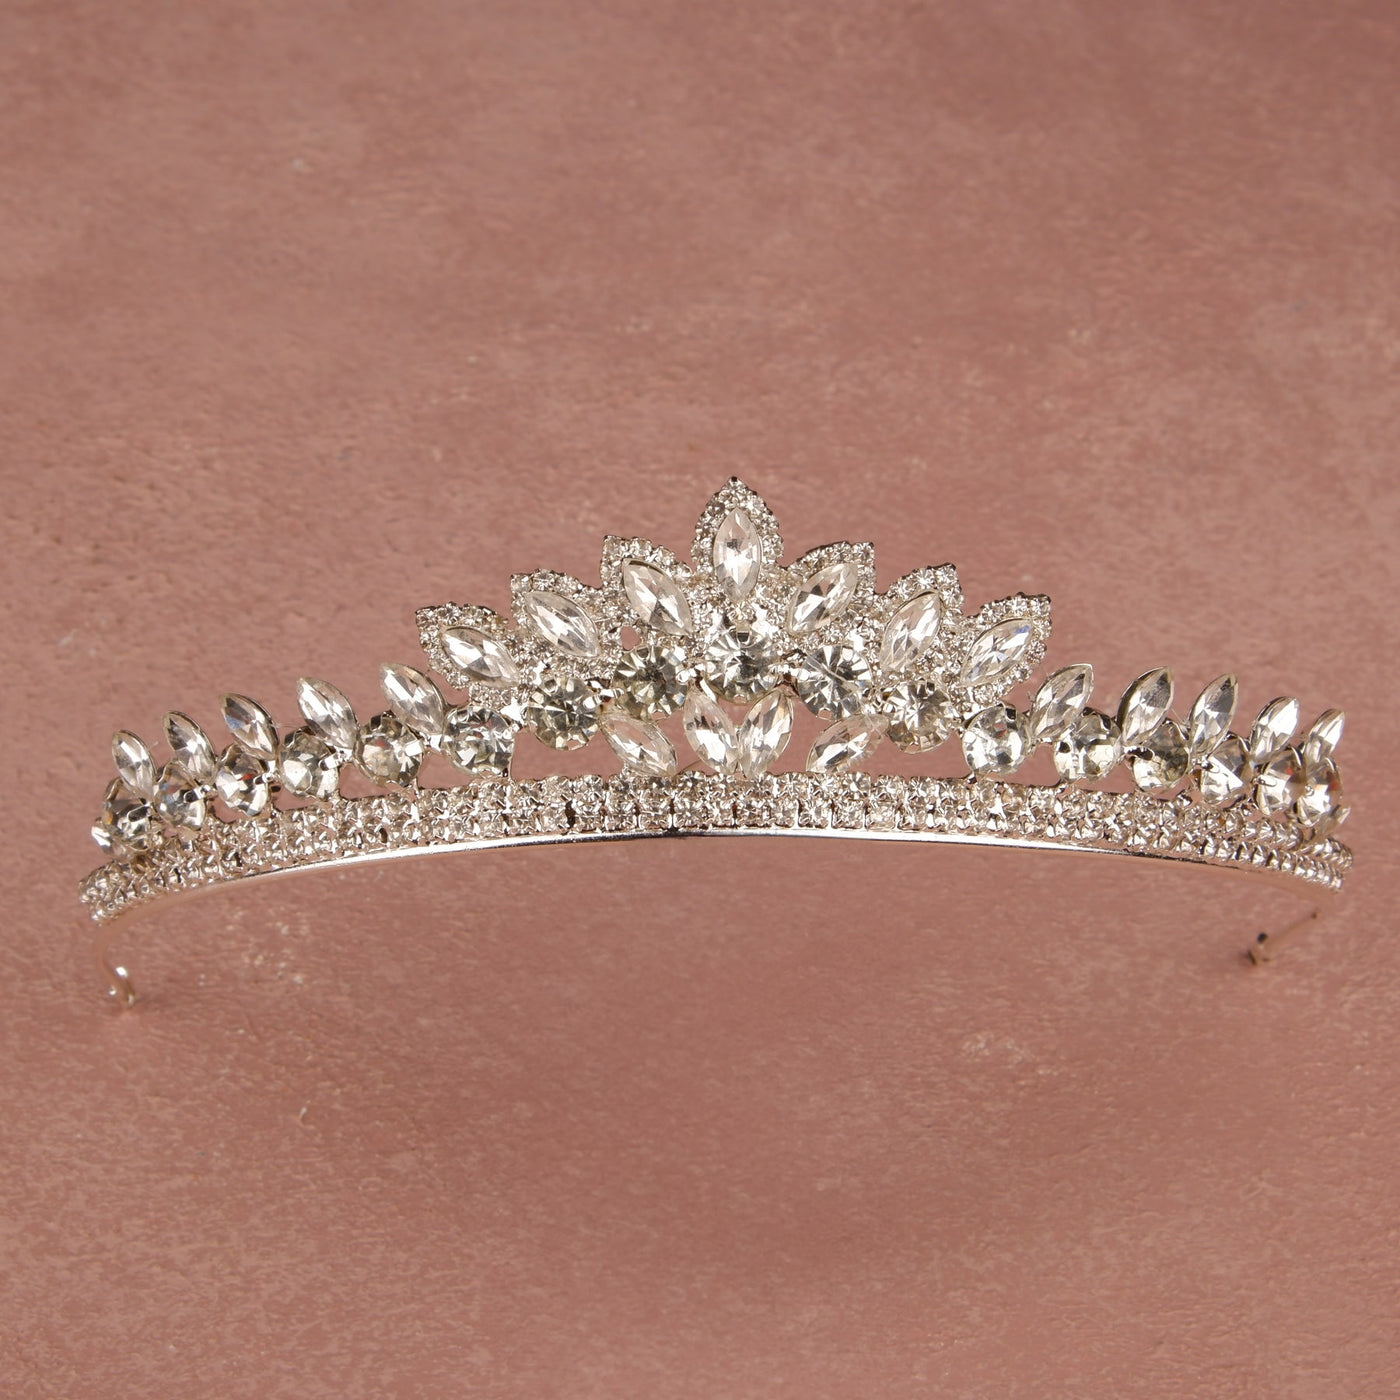 Floral Design Wedding and Birthday Crown Crystal Stone Crown for Bridesmaids